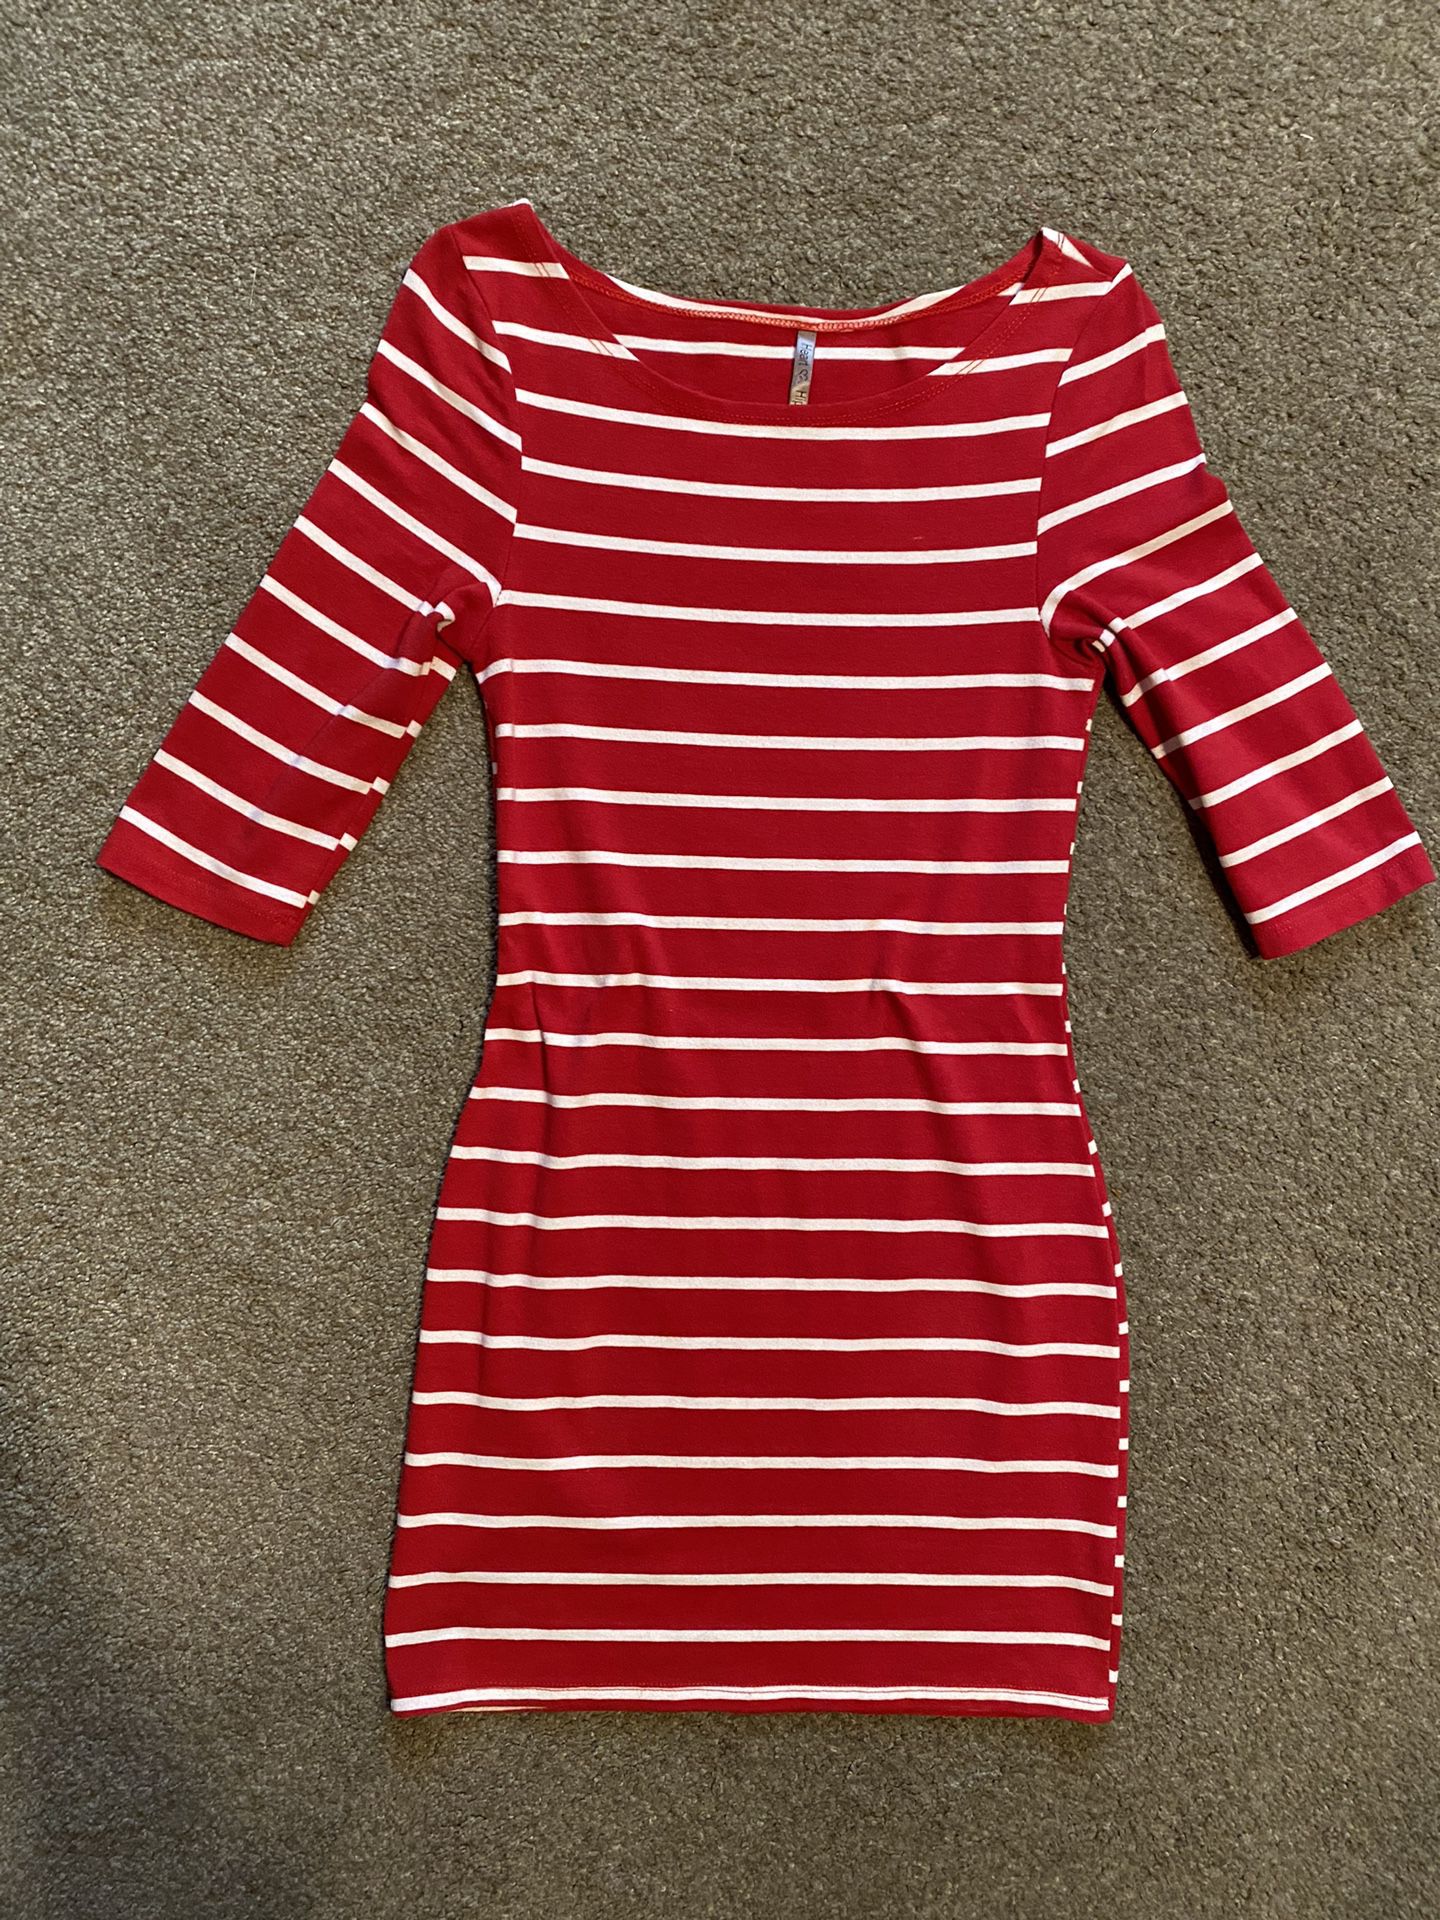 White And Red Striped Short Dress Size Small 